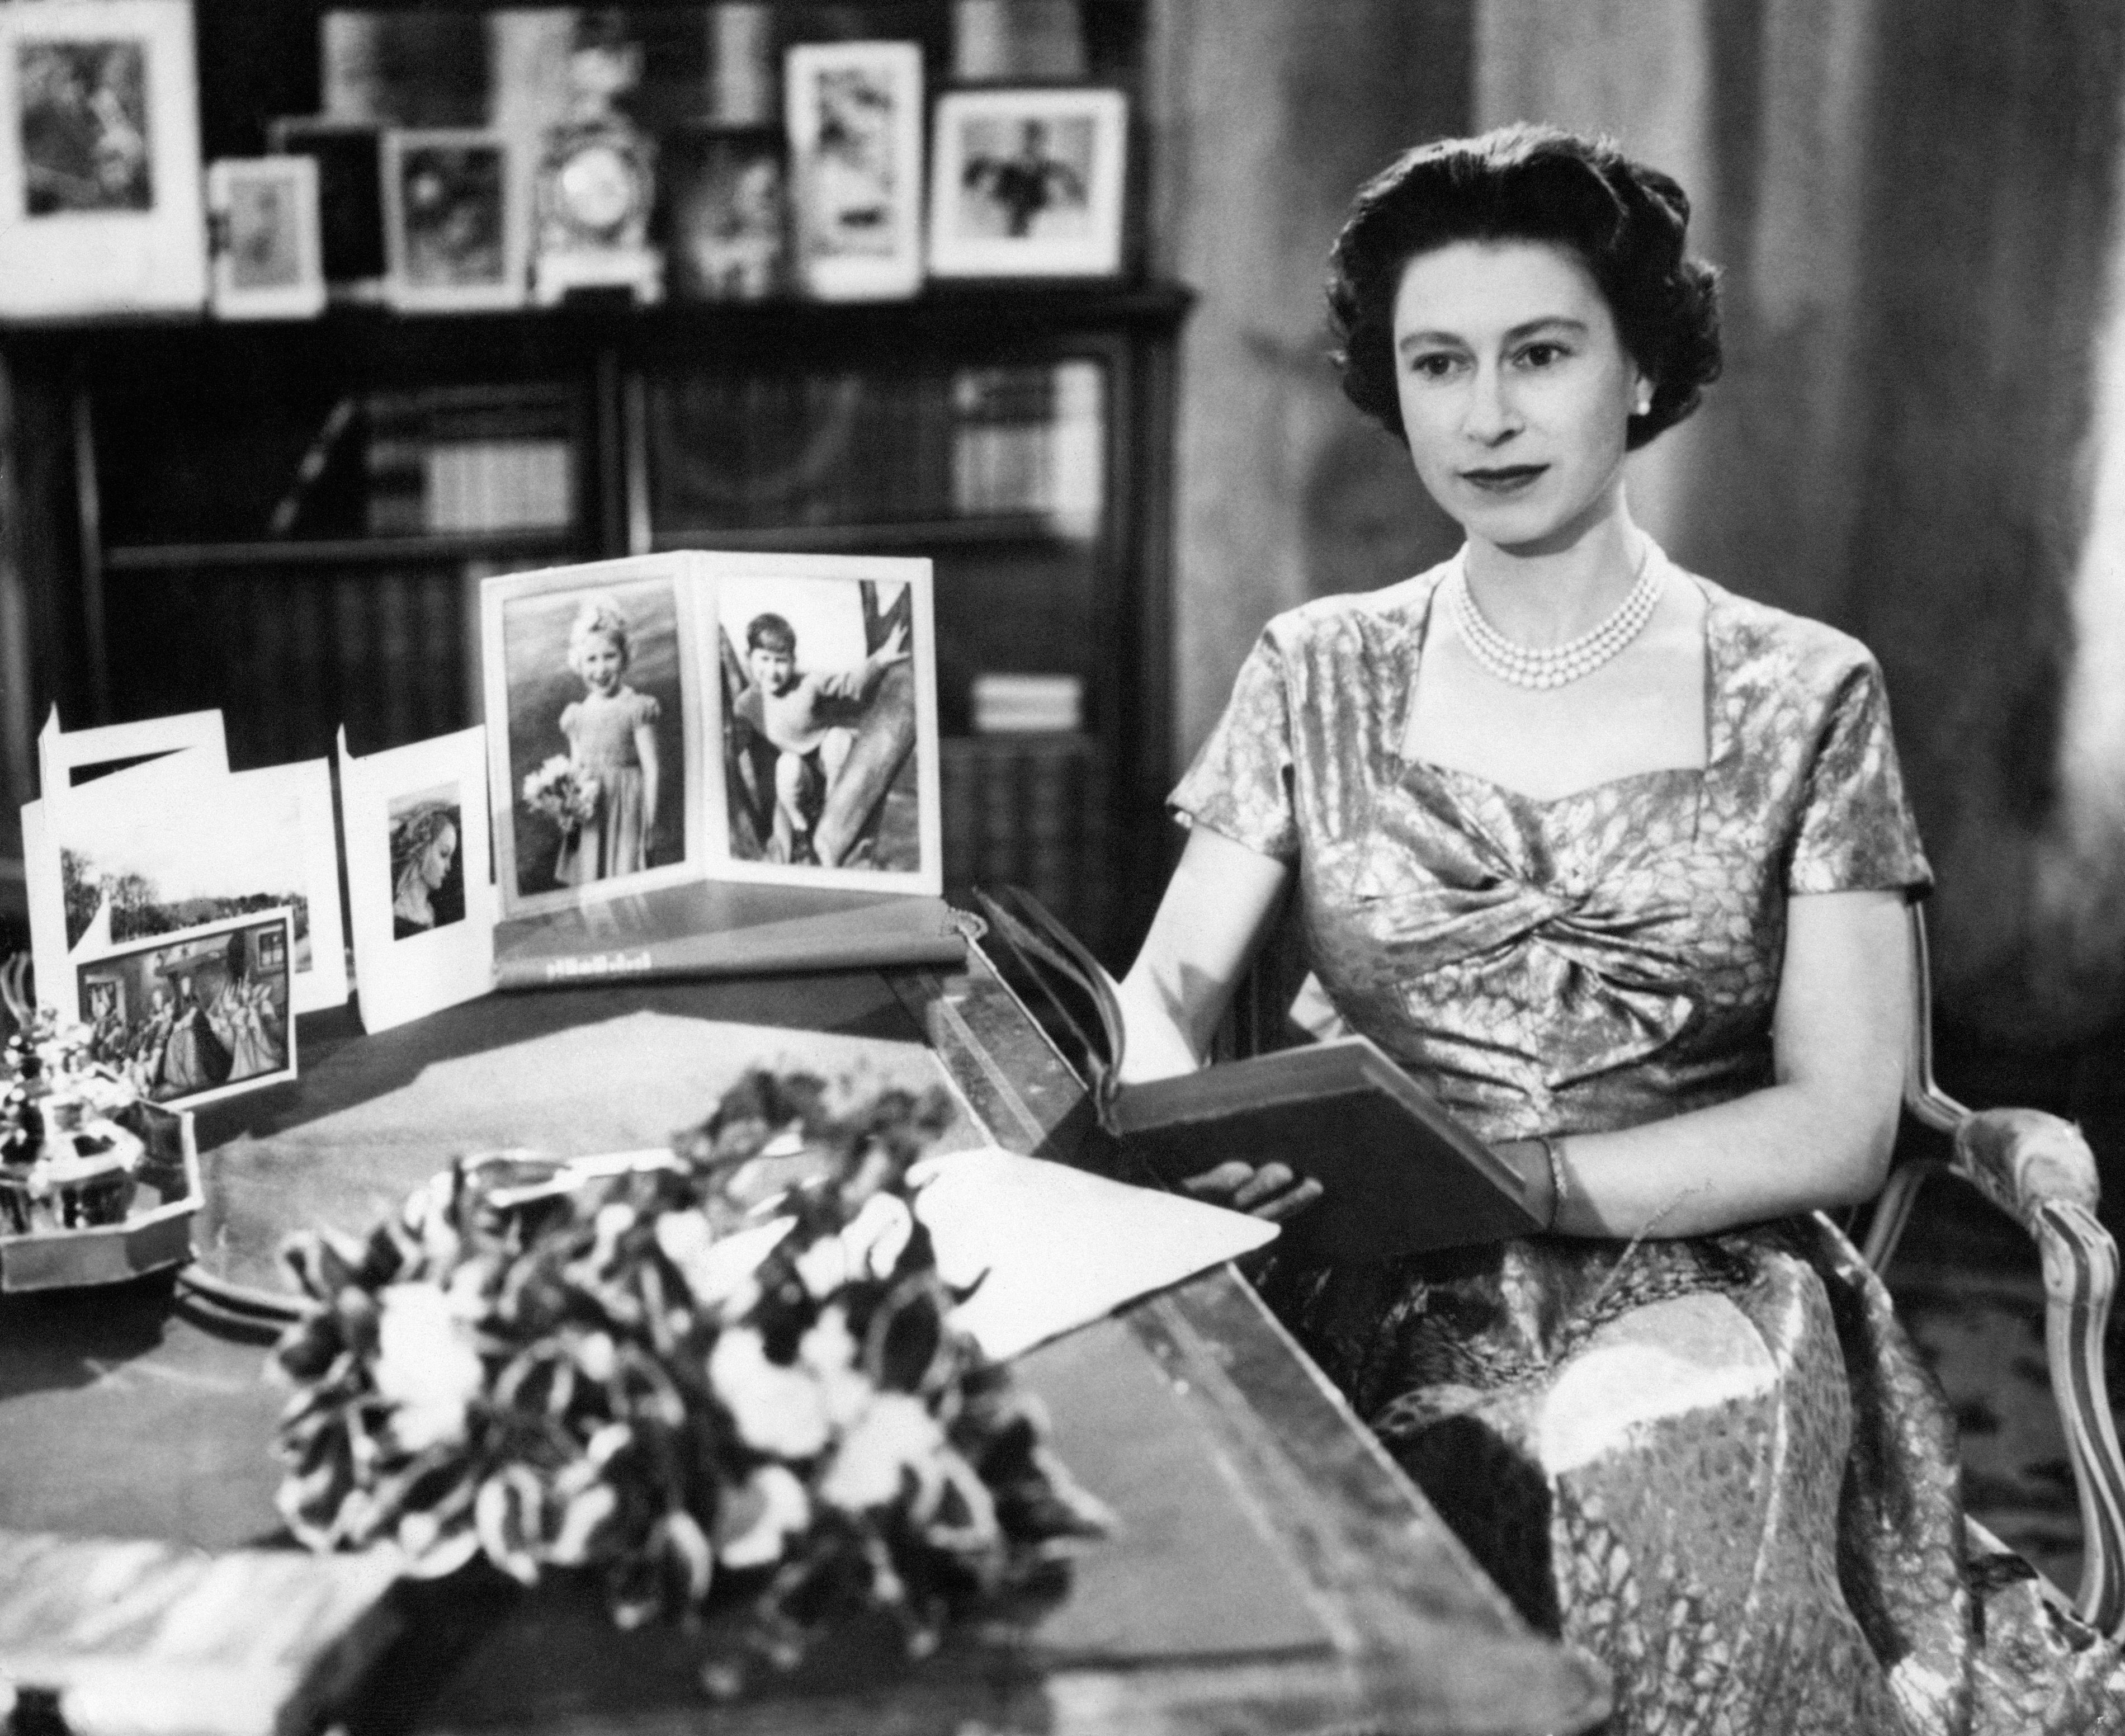 <p>Queen Elizabeth II, wearing a gold lamé dress, was photographed in the Long Library at her Sandringham estate on Christmas Day in 1957 shortly after making the traditional Christmas Day broadcast to the nation, which was televised that year for the first time ever. It was also the 25th anniversary of the first radio message to the Commonwealth made by her grandfather, King George V. On her desk were portraits of Prince Charles and Princess Anne. The queen held a copy of "Pilgrim's Progress," from which she read a few lines during her message. </p>